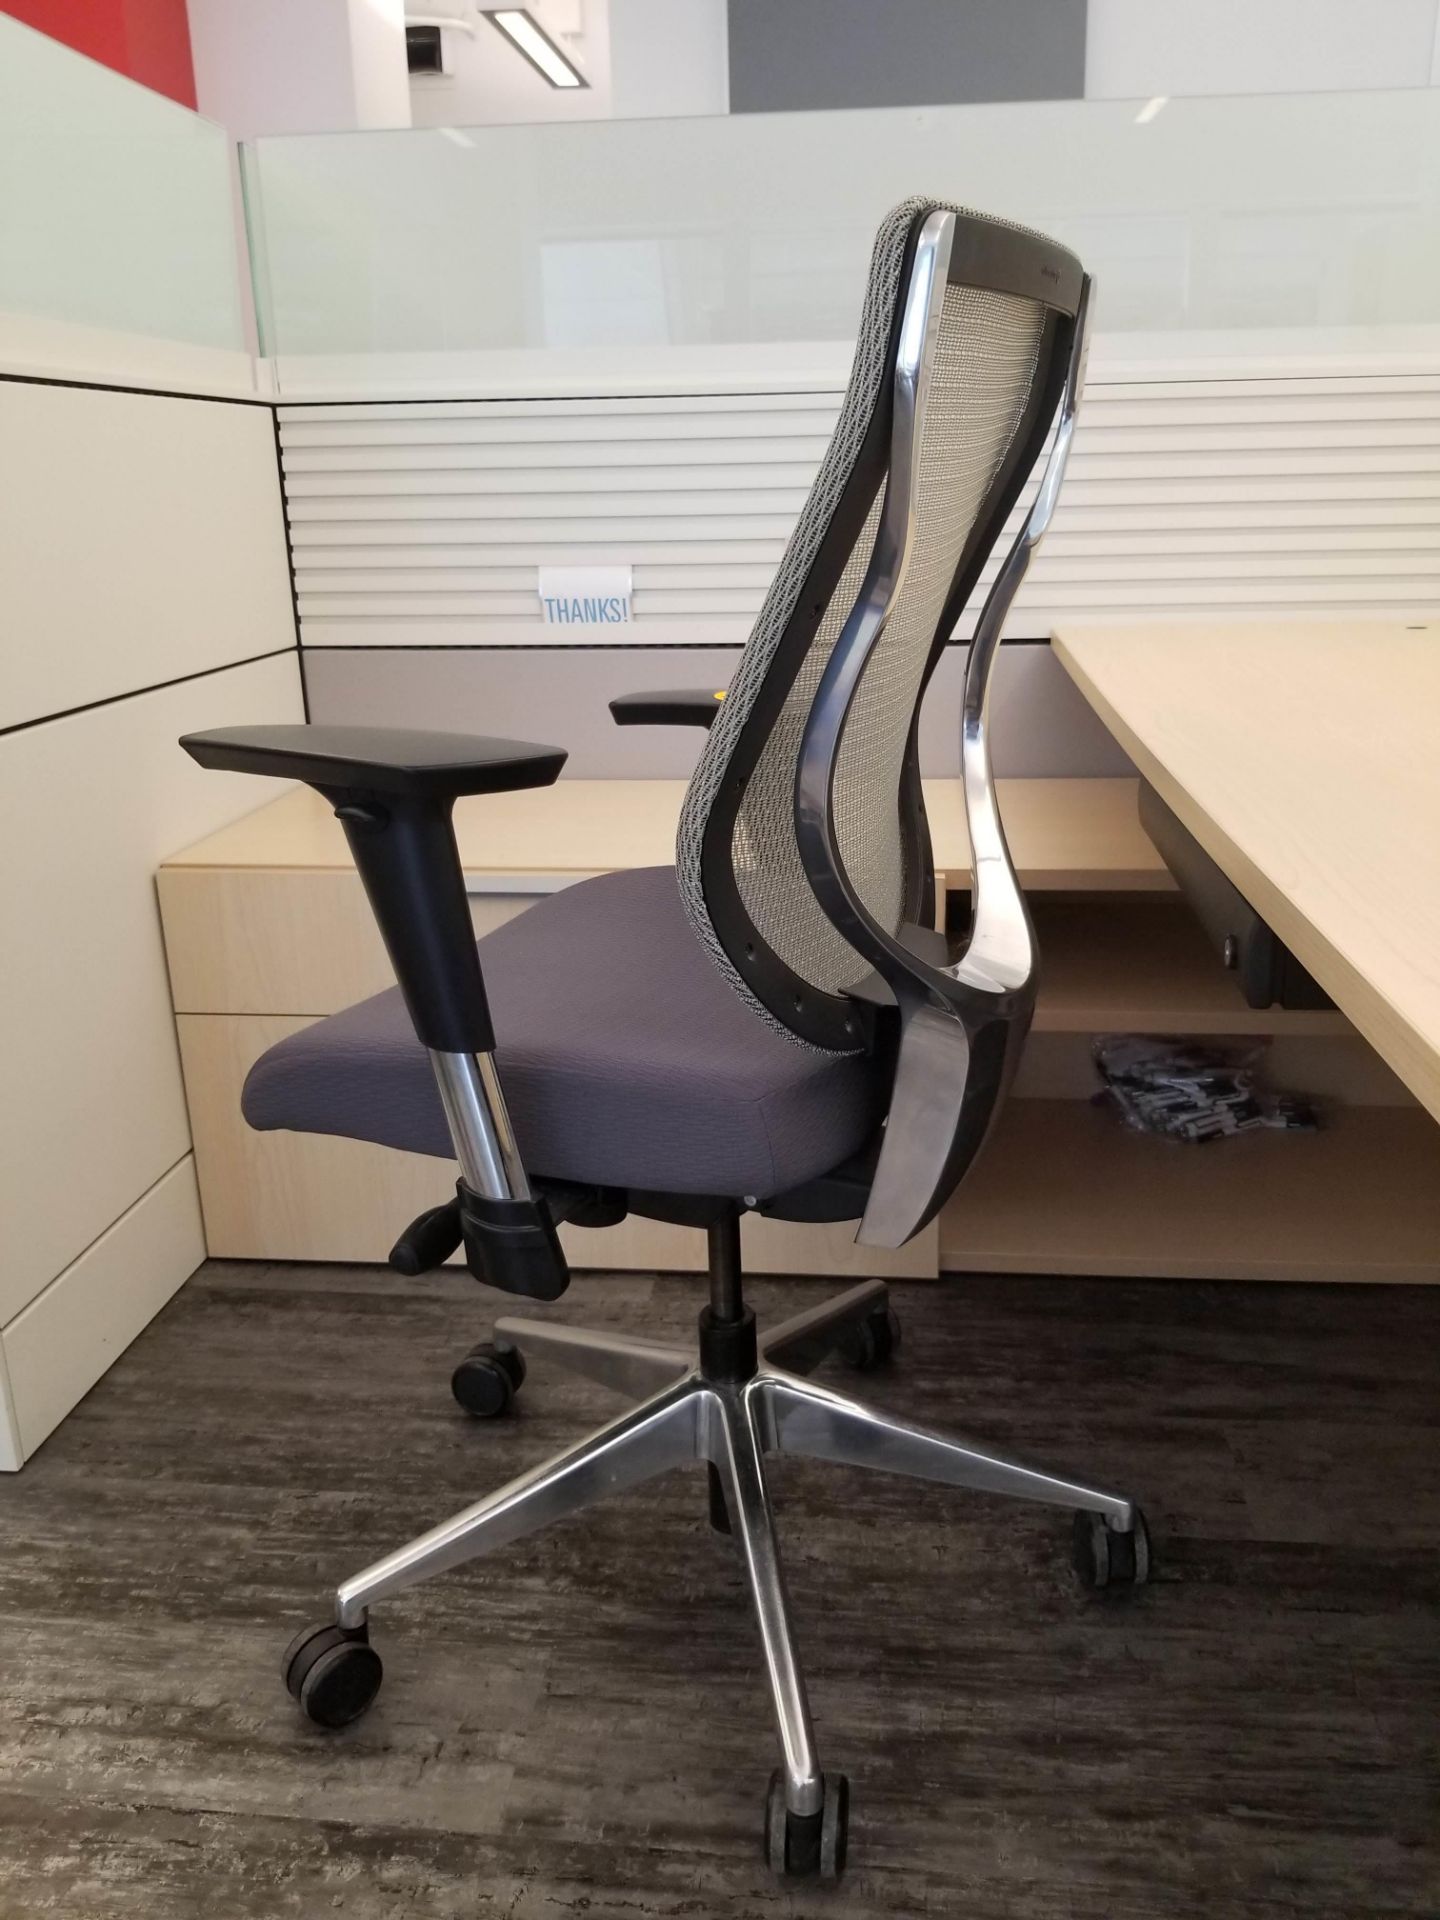 ALLSEATING - EXEC. CHAIR ON CASTERS, GREY W/ MESH BACK, ADJUSTABLE HEIGHT, ADJUSTABLE ARMS - Image 2 of 5